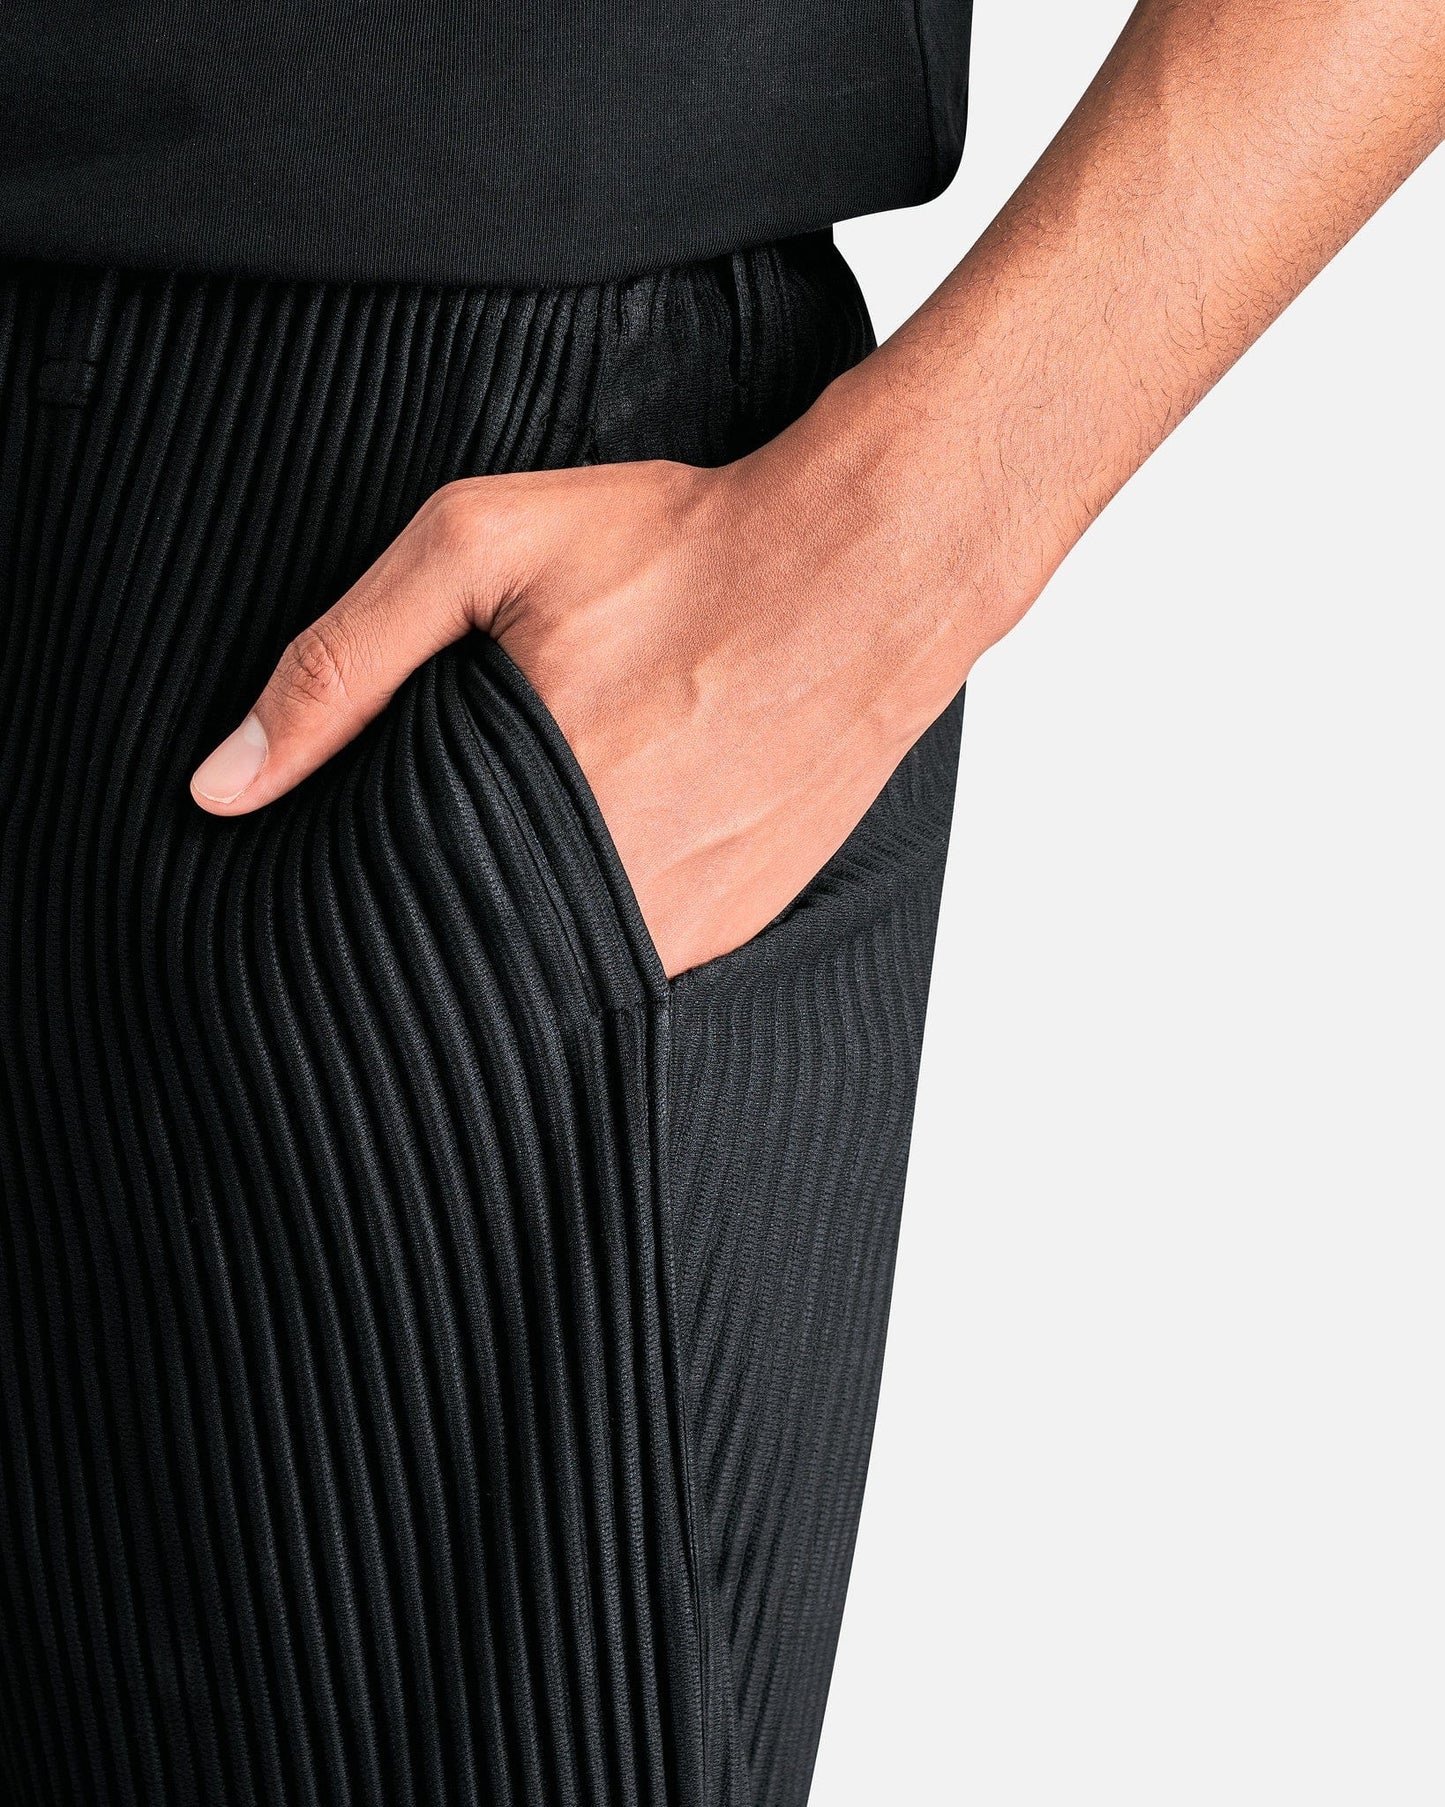 Homme Plissé Issey Miyake Men's Pants Tailored Pleats 1 Trousers in Black